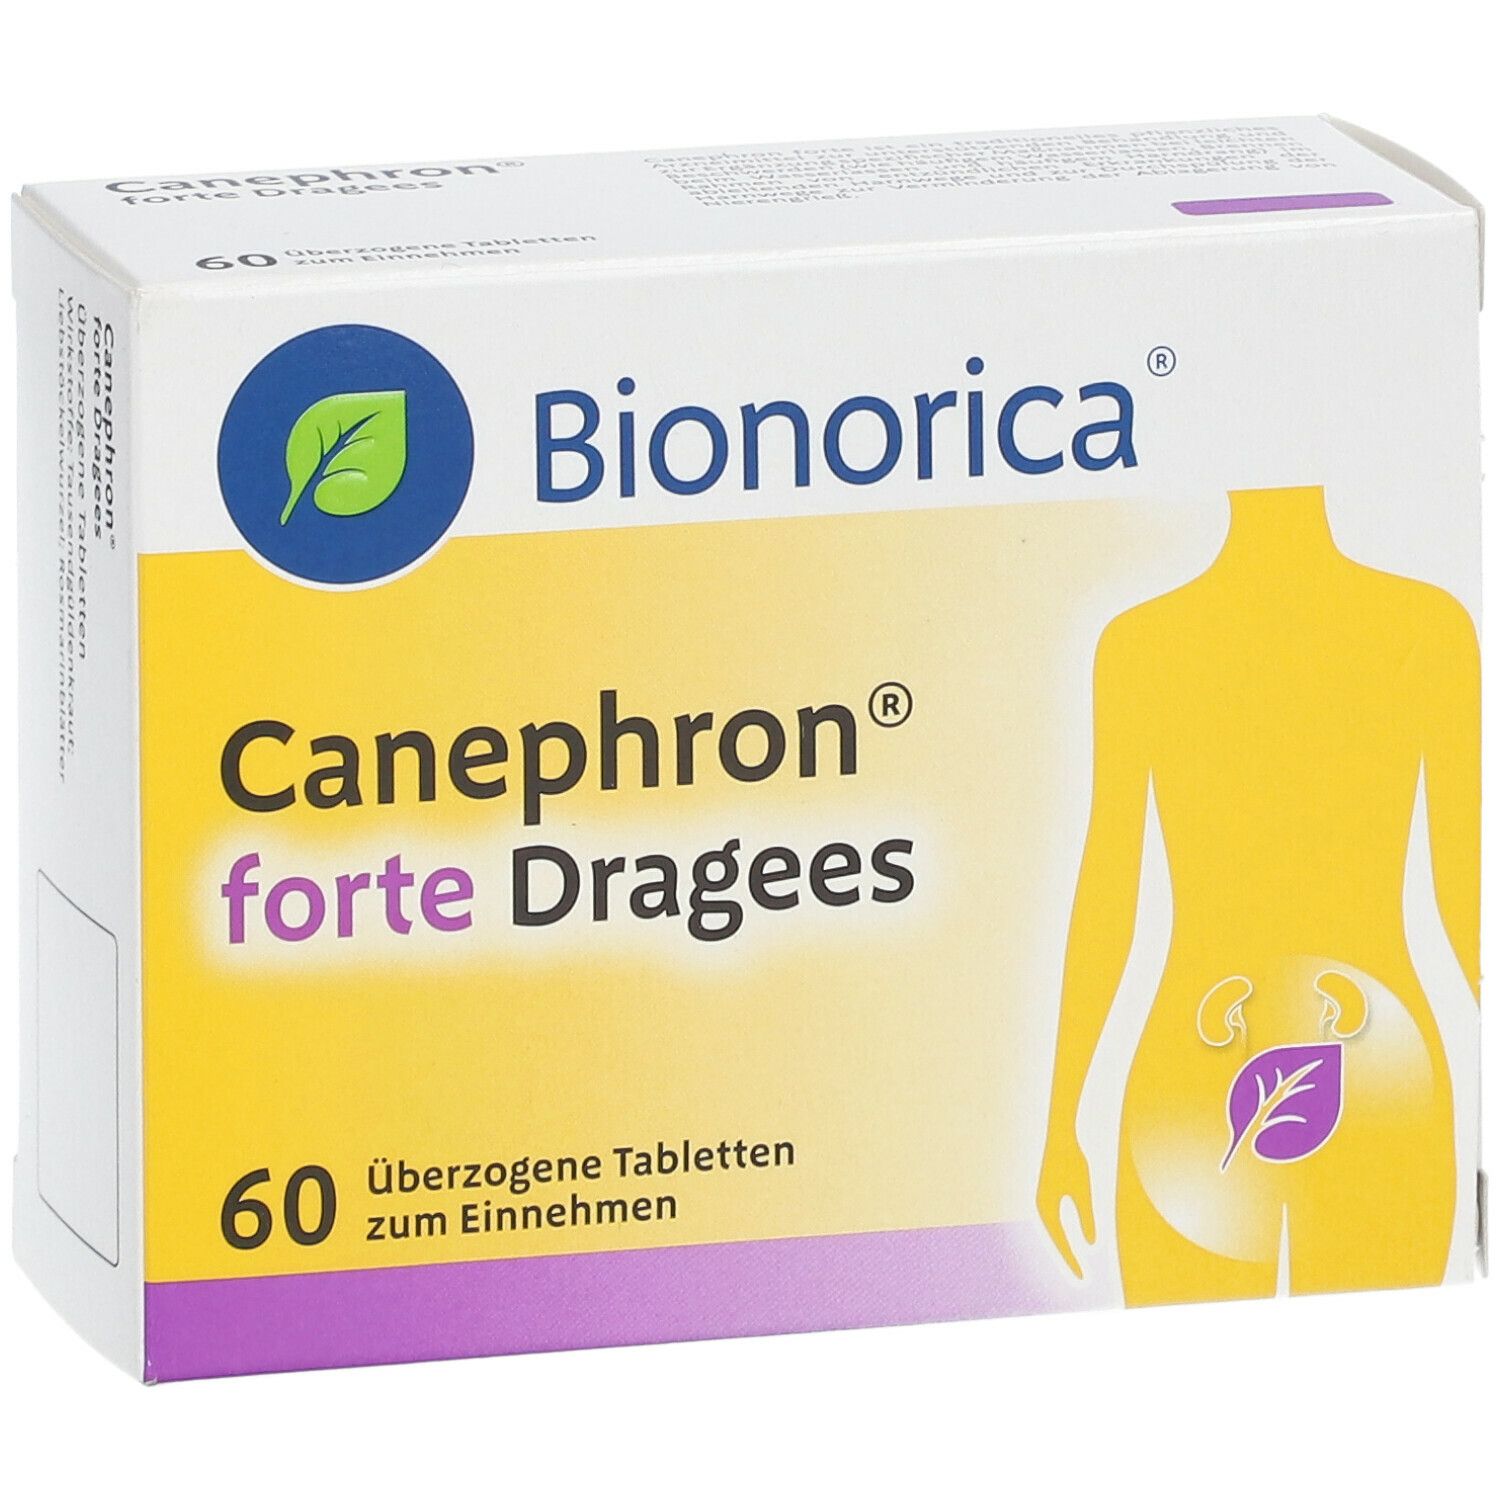 Canephron® forte Dragees